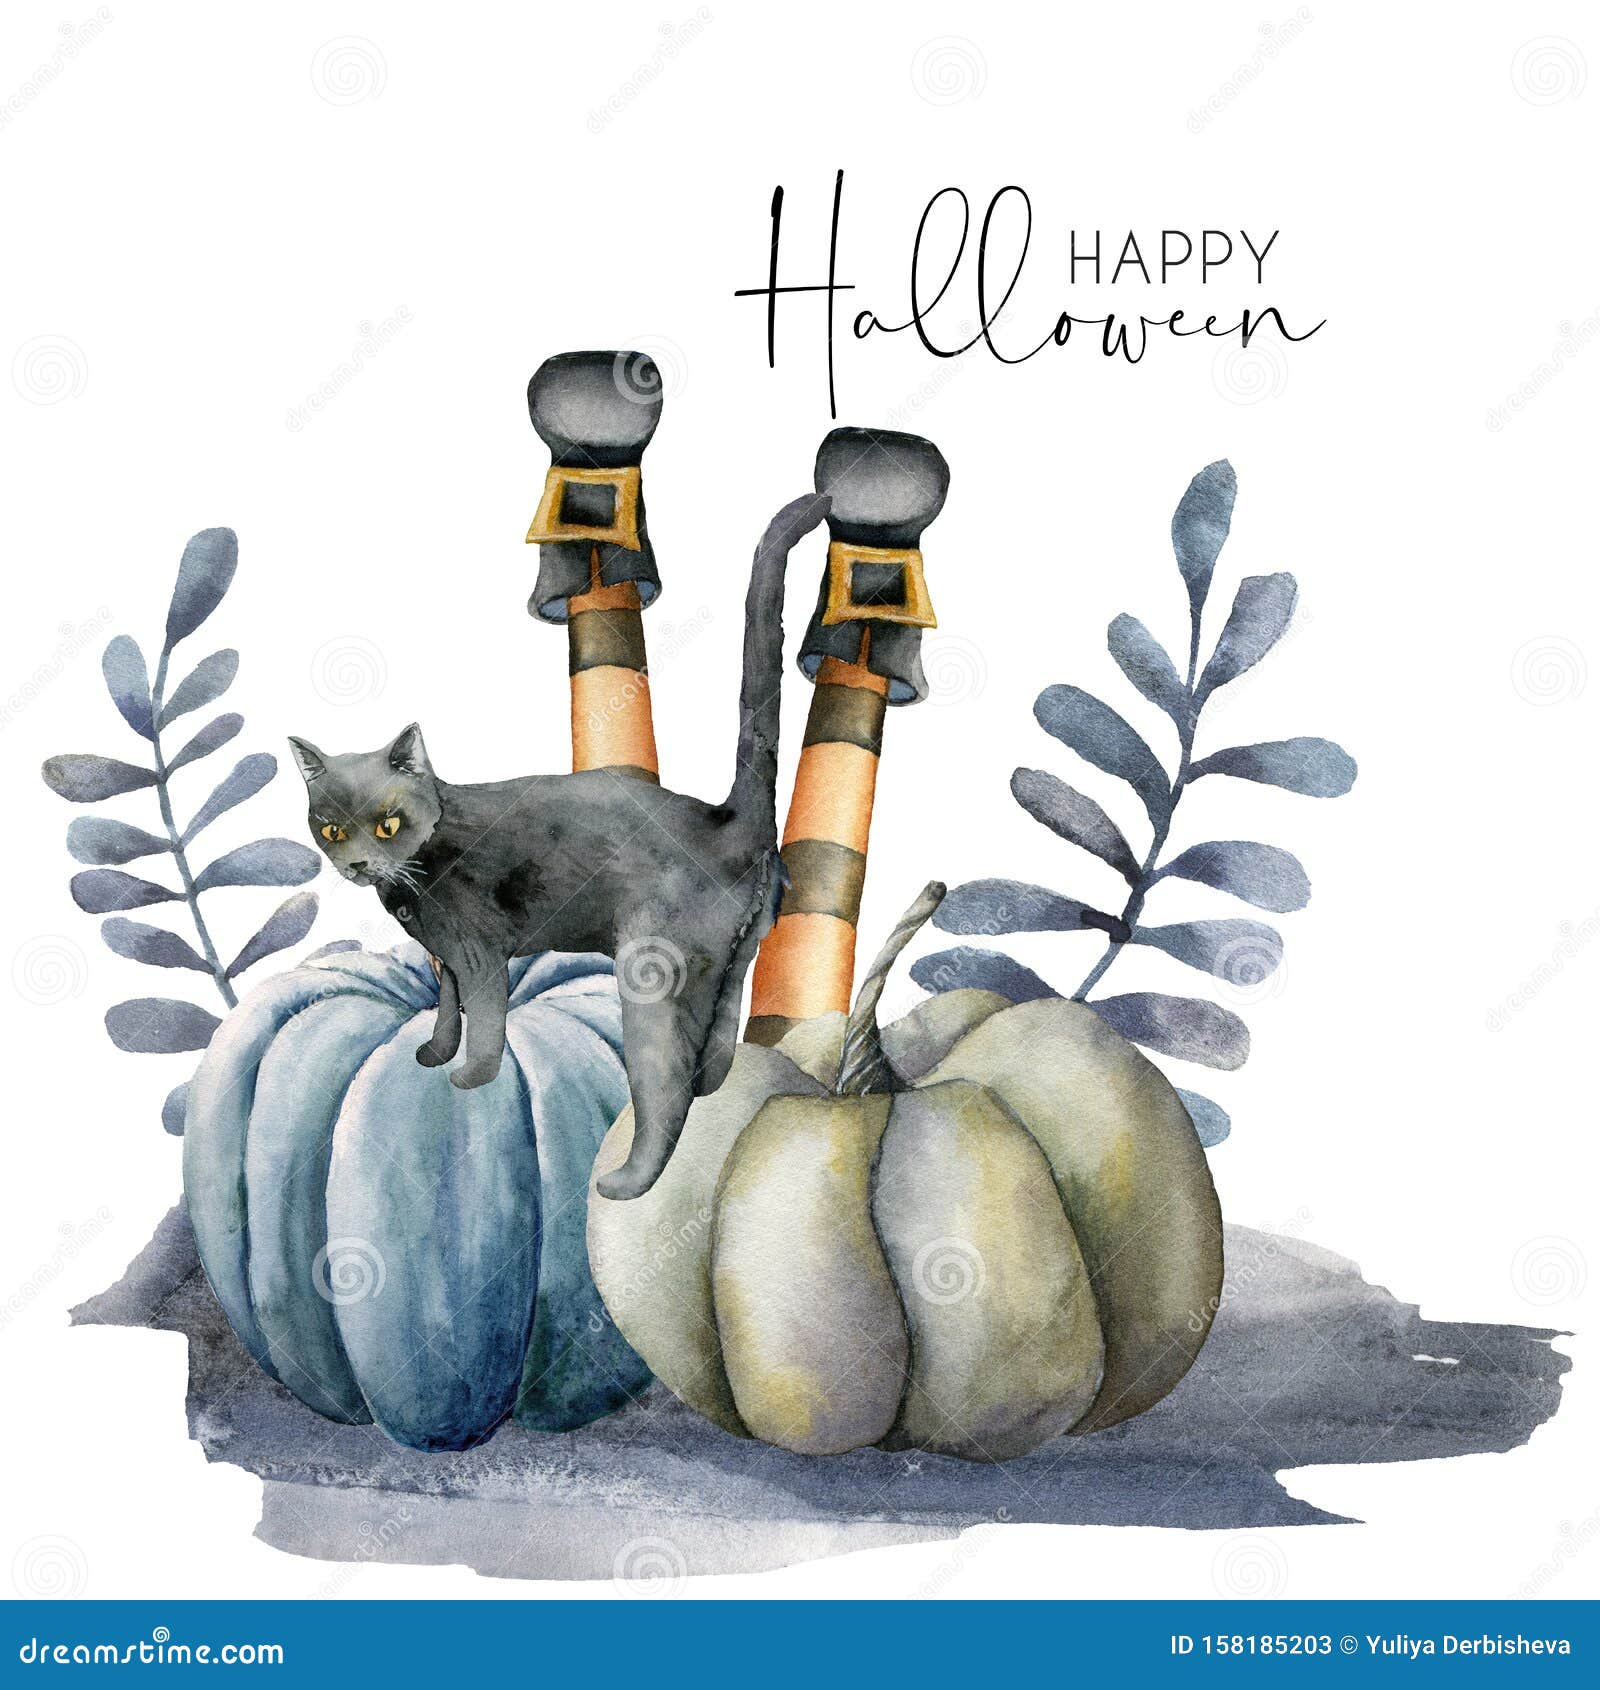 watercolor halloween card with cat and pumpkins. hand painted holiday template with gourds, tomcat and feet witch